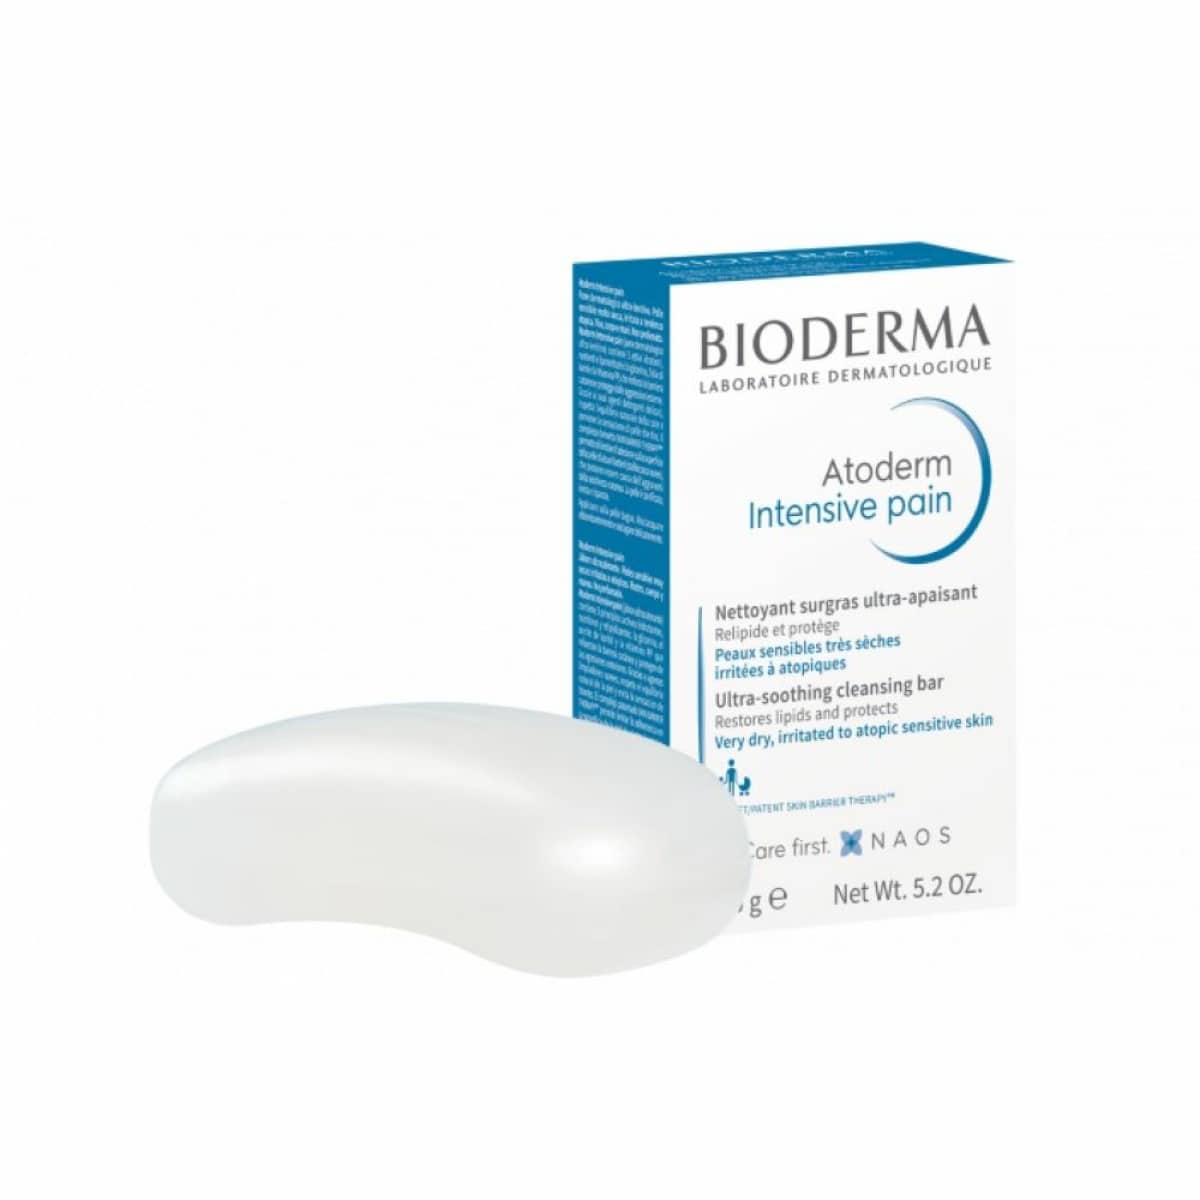 Bioderma Atoderm Intensive Pain Soap Especially Soothing, 150 g